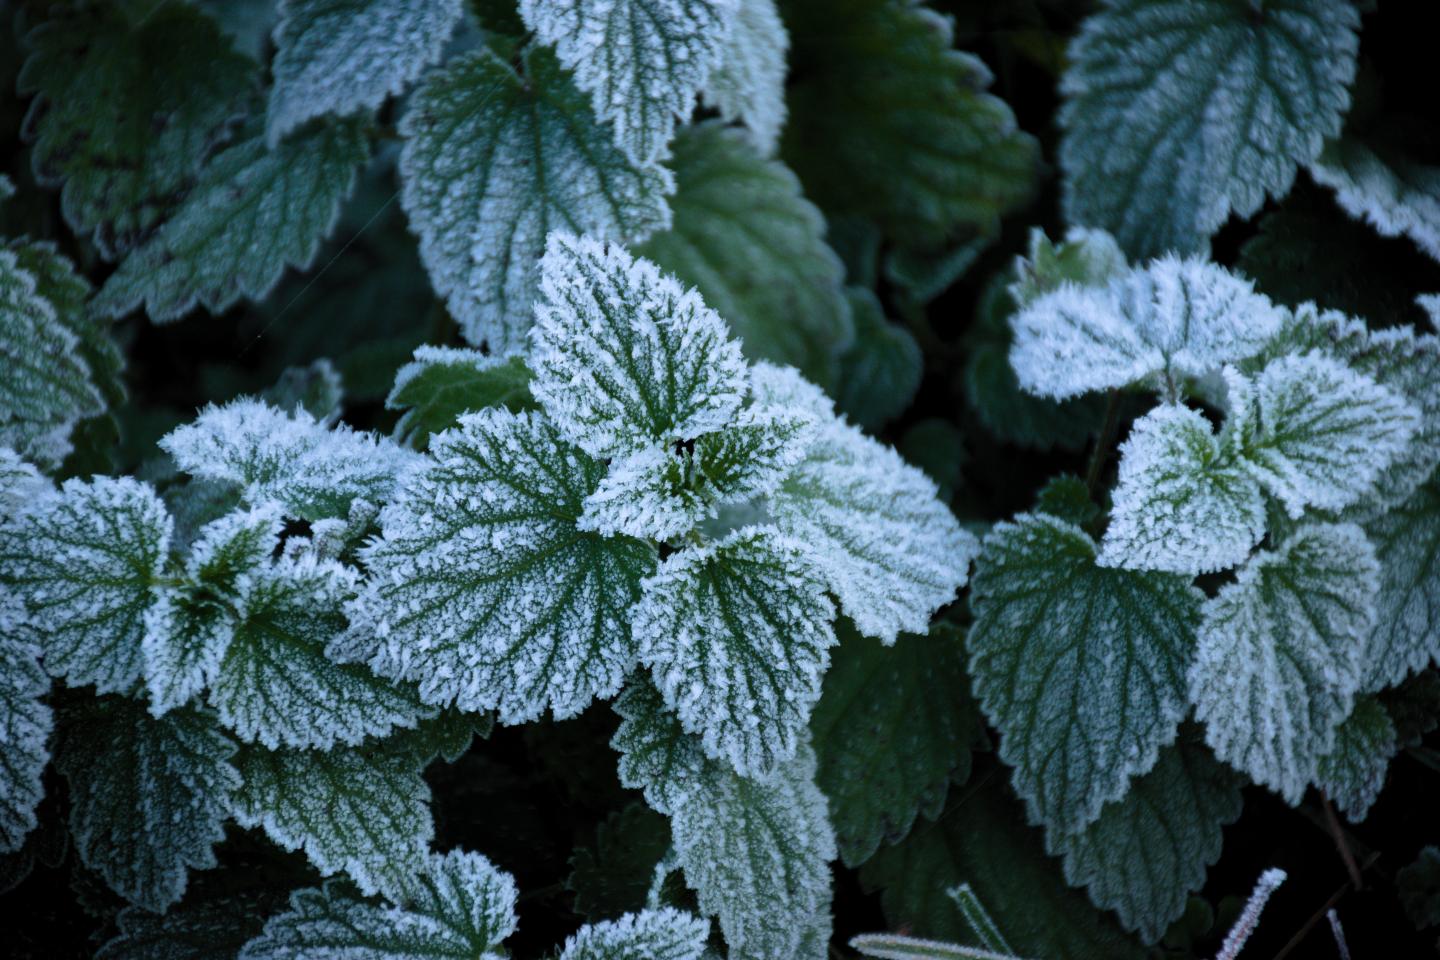 Frost on mint leaves